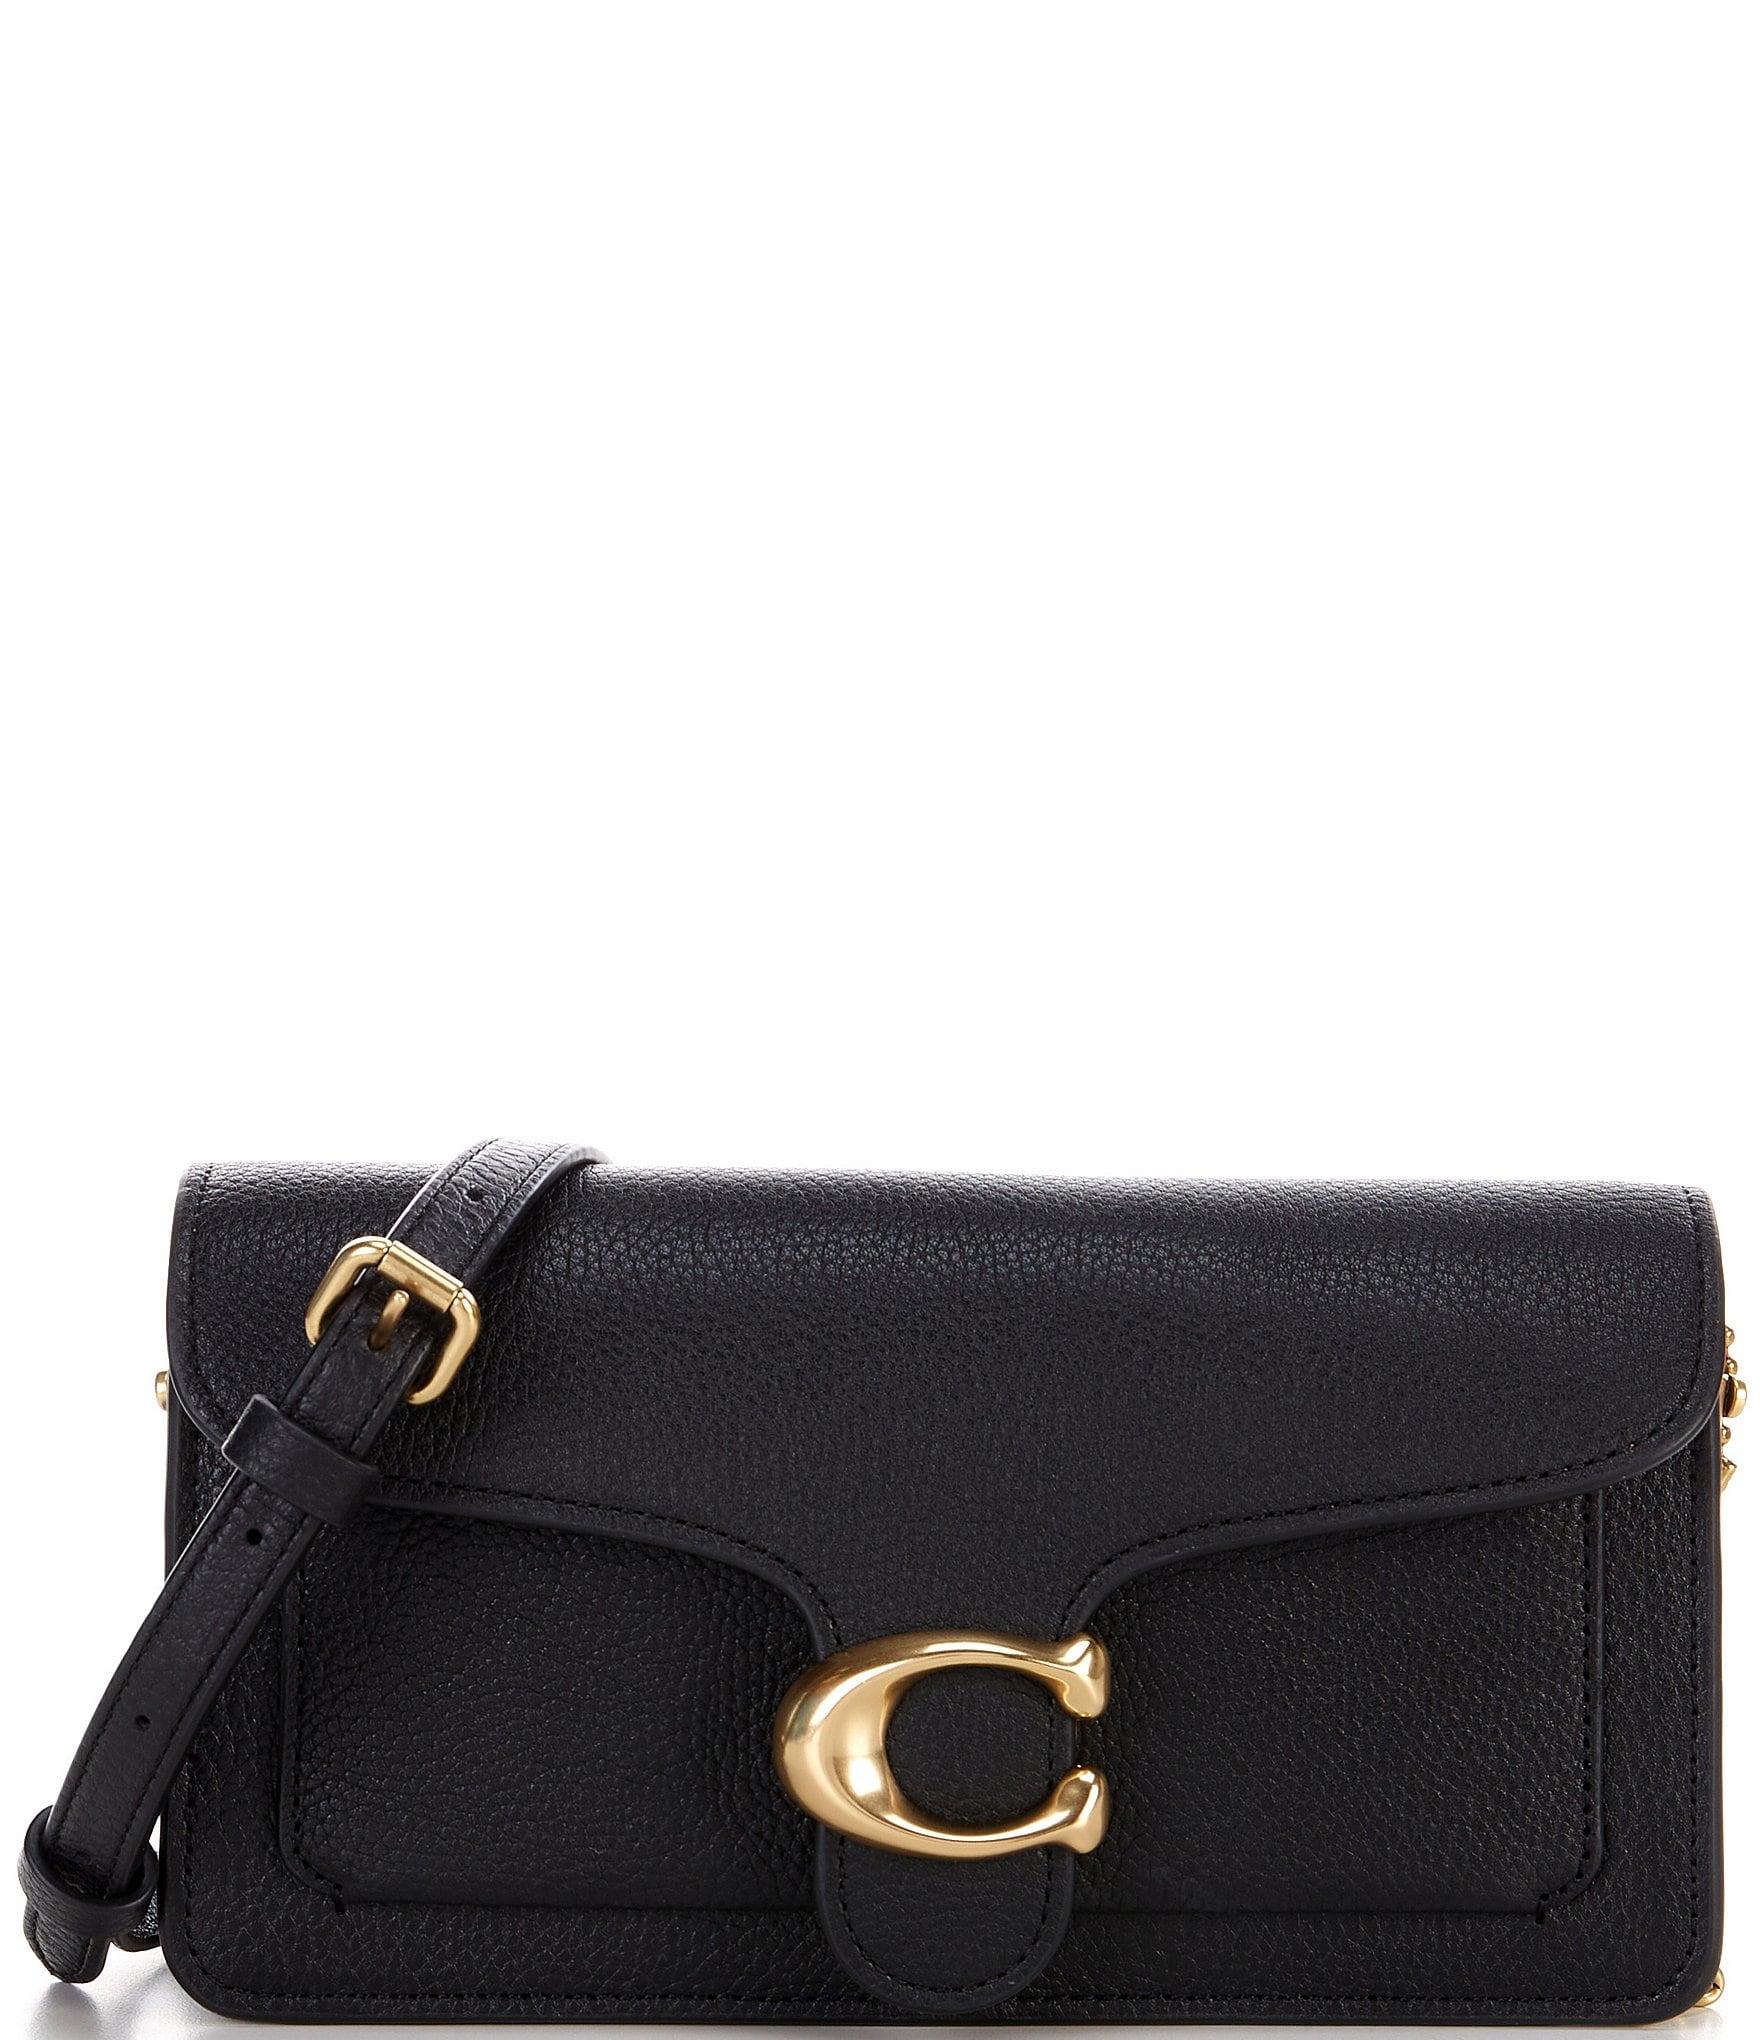 Coach Tabby Leather Wallet - Black